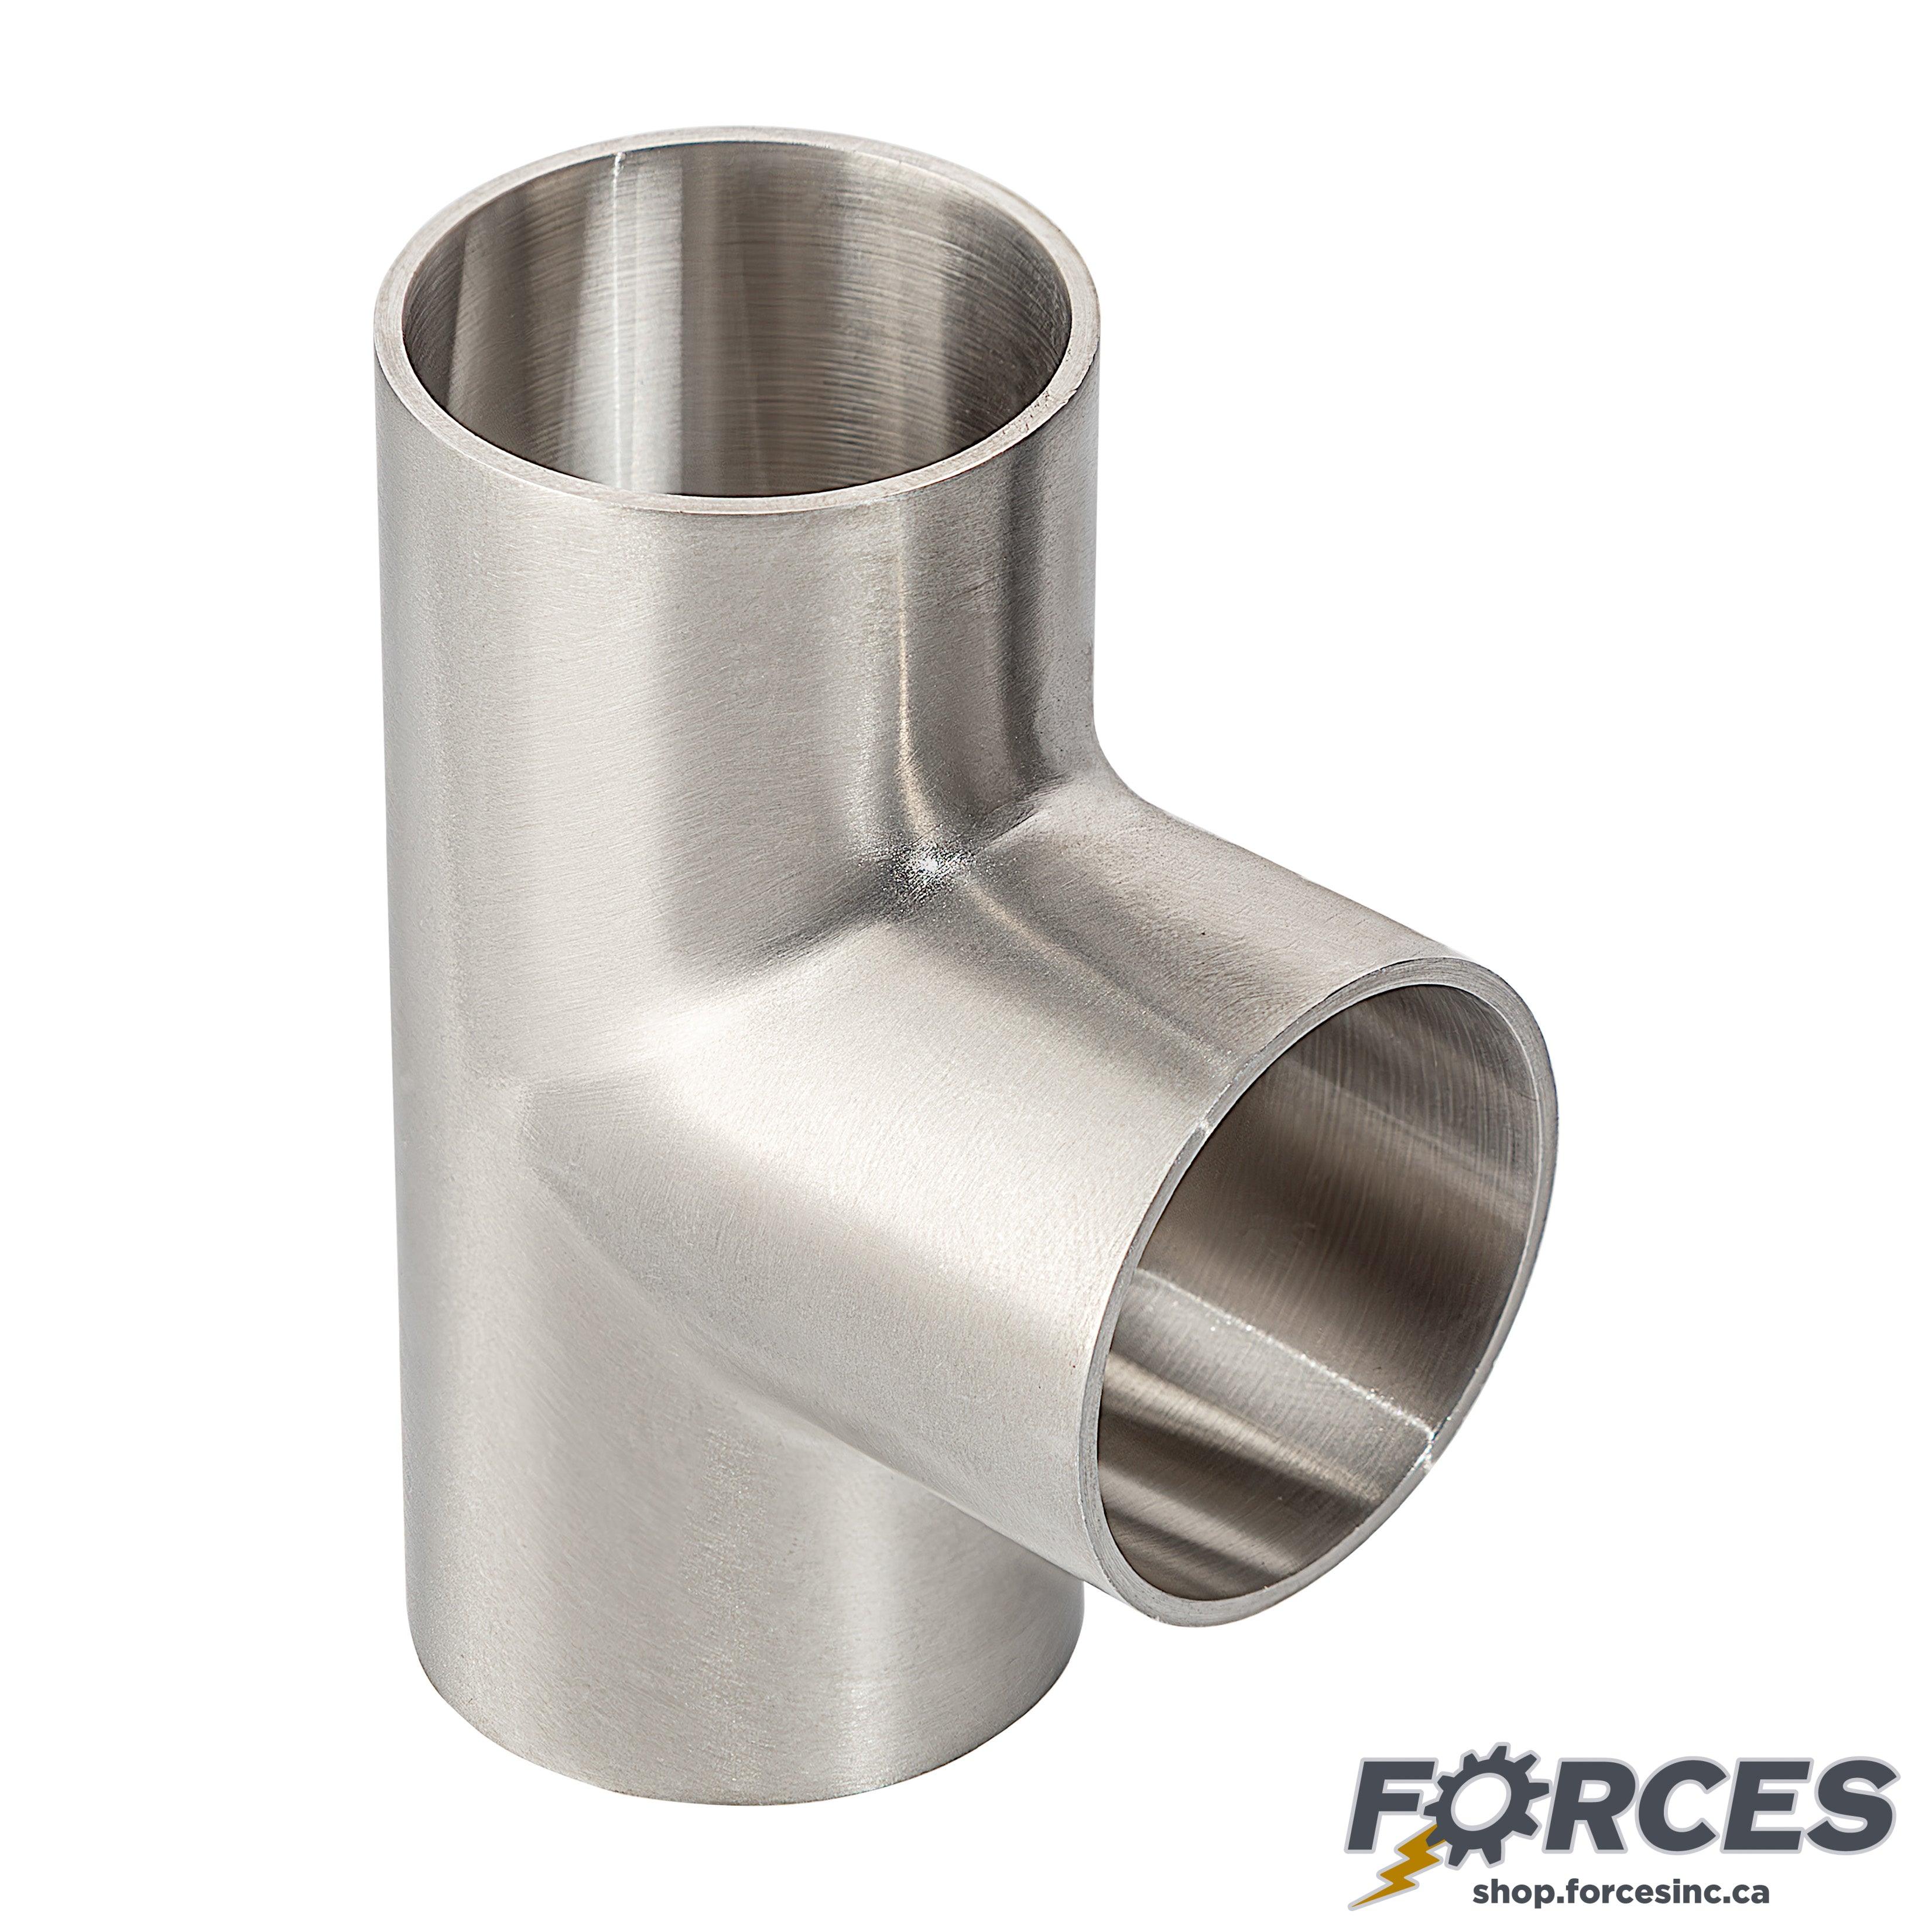 1" Butt Weld Short Tee - Stainless Steel 316 - Forces Inc